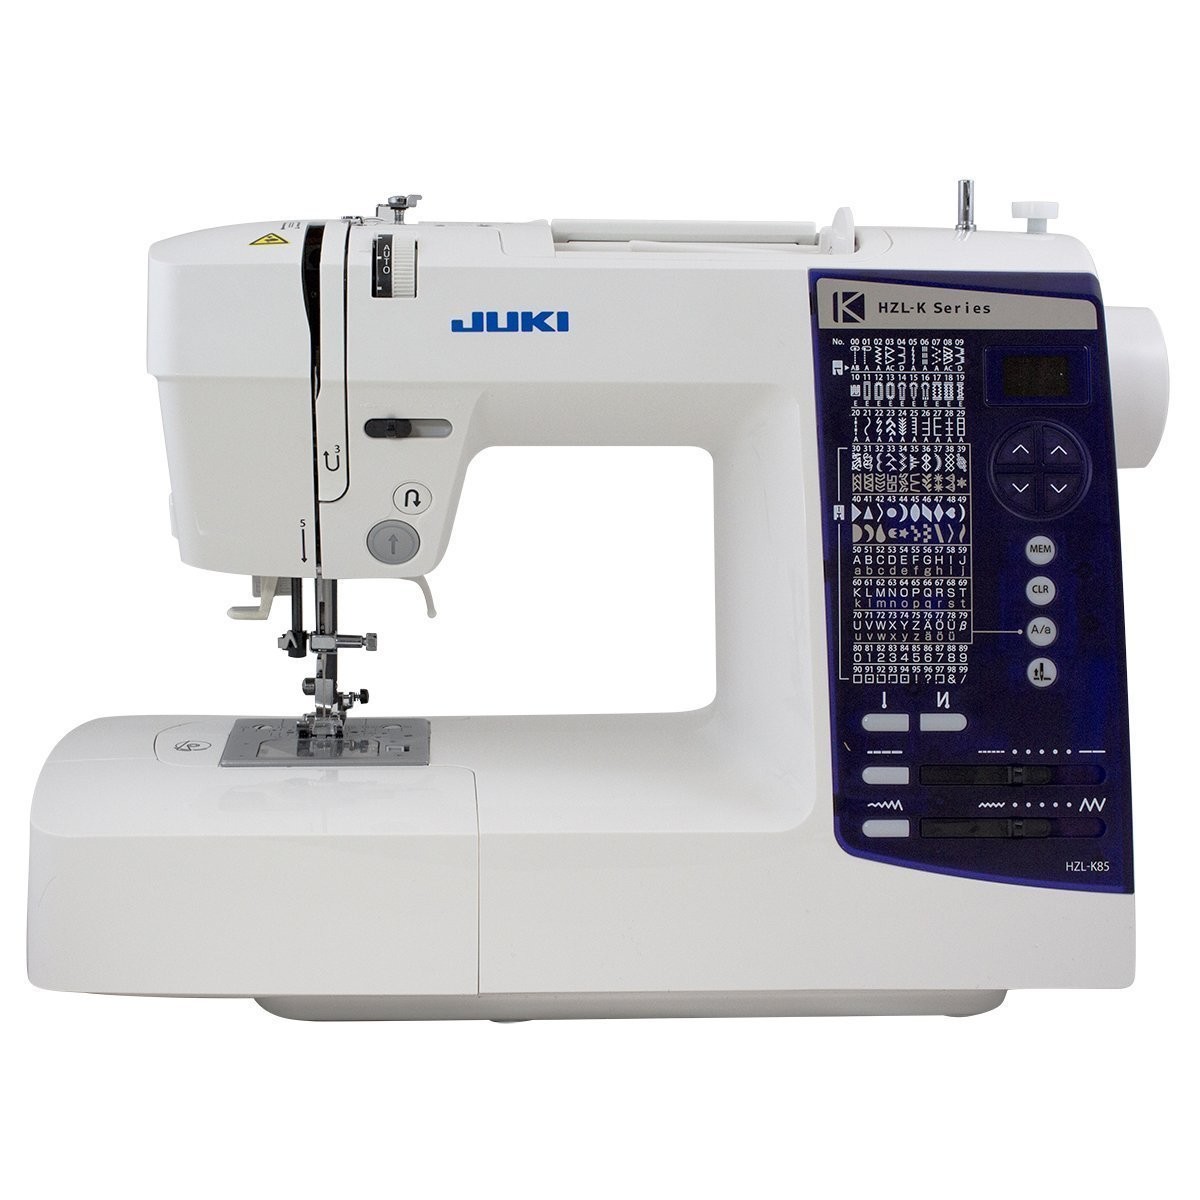 Juki HZL-K85 Computer-Controlled Household Sewing Machine $399.00 &amp; FREE Shipping